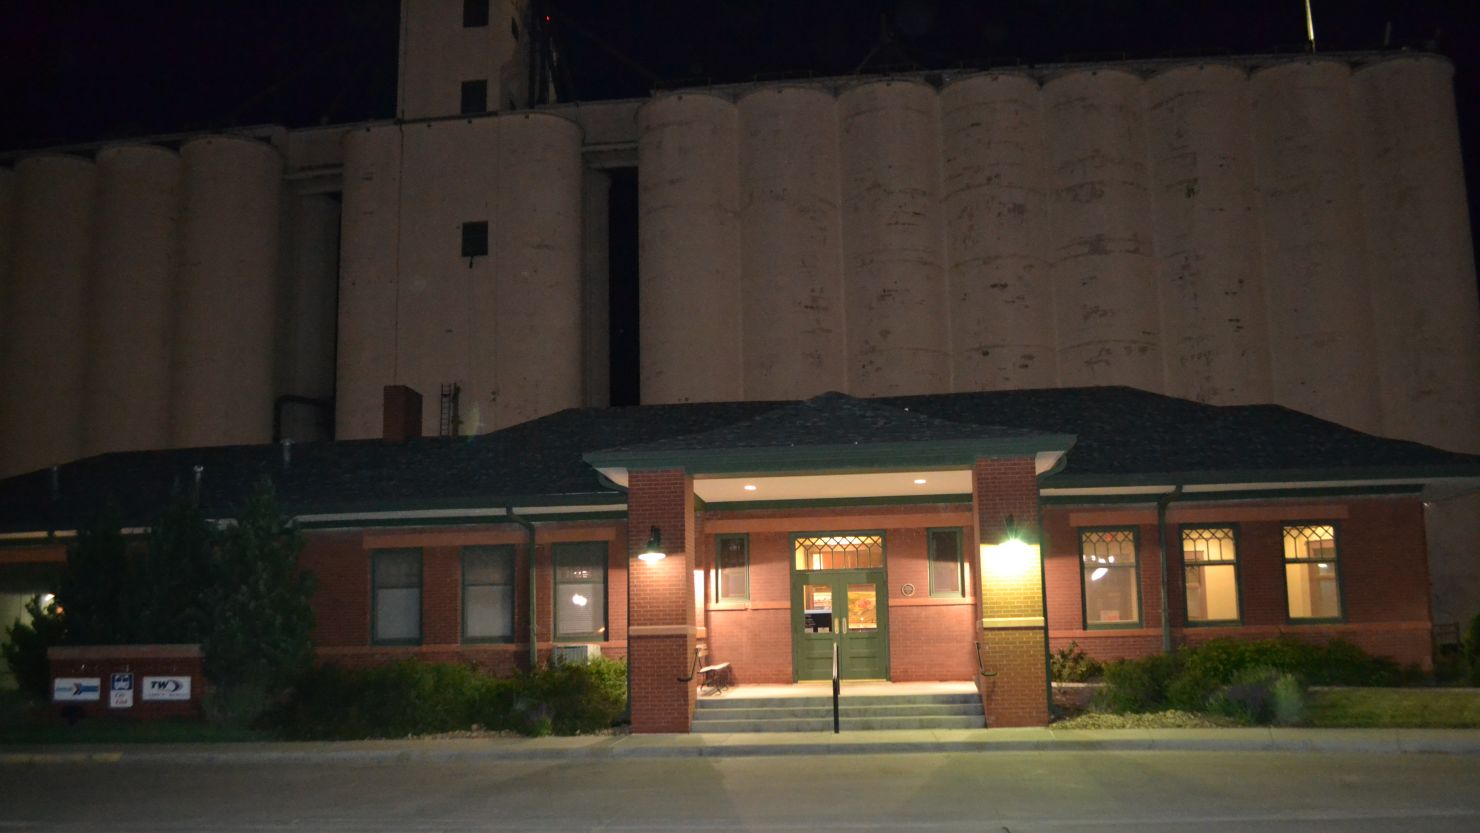 The train station in Garden City Kansas where Amtrak's Southwest Chief arrives twice a day, stands before a bank of grain elevators.